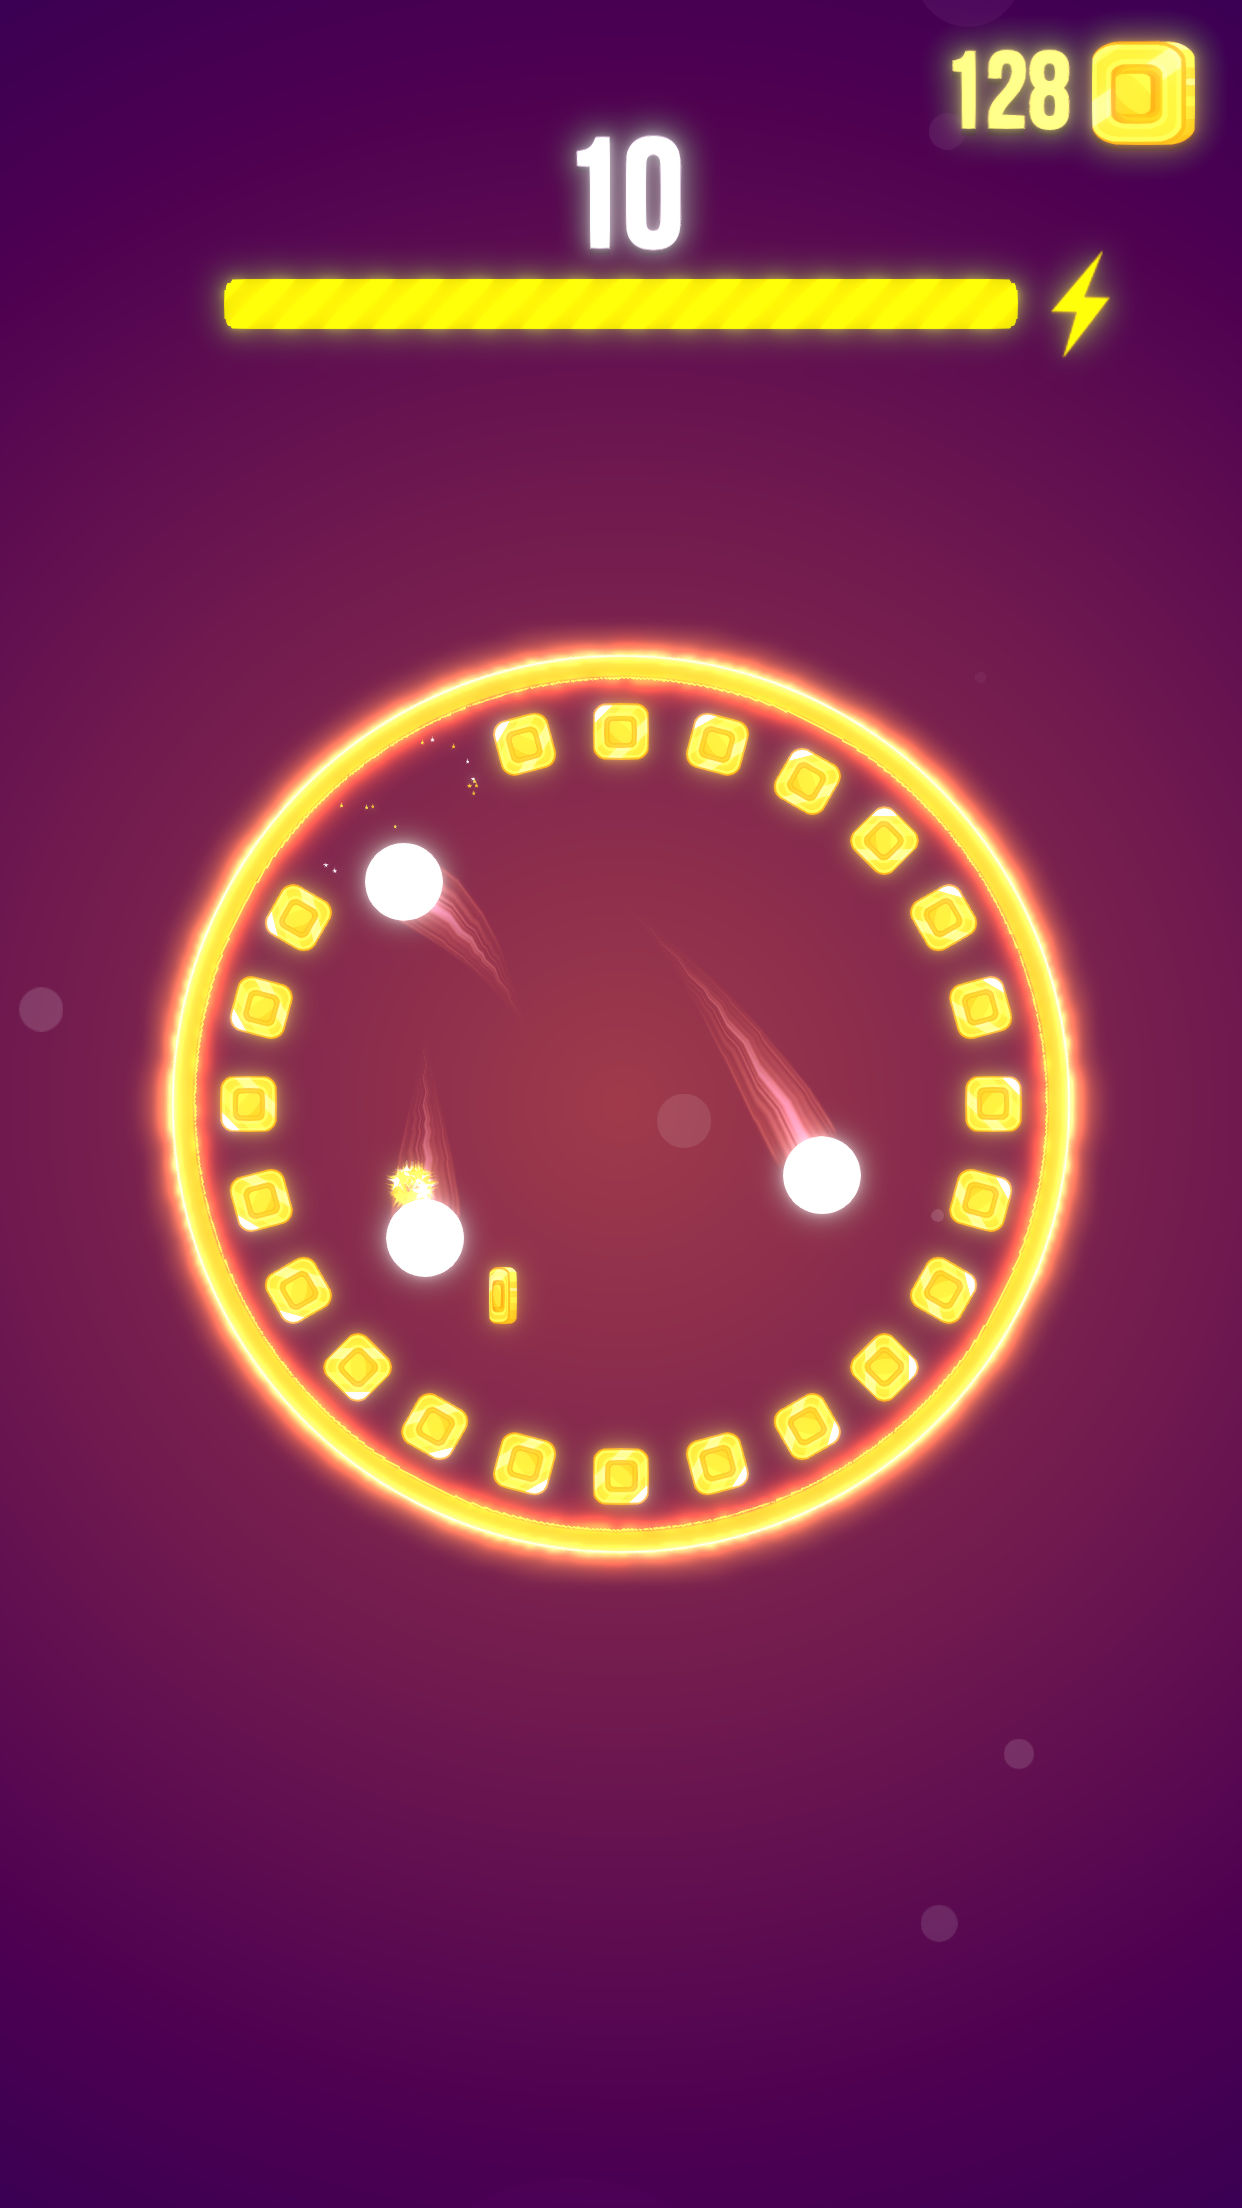 Crazyball Game Apple AppStore - Google Play Store Image 2